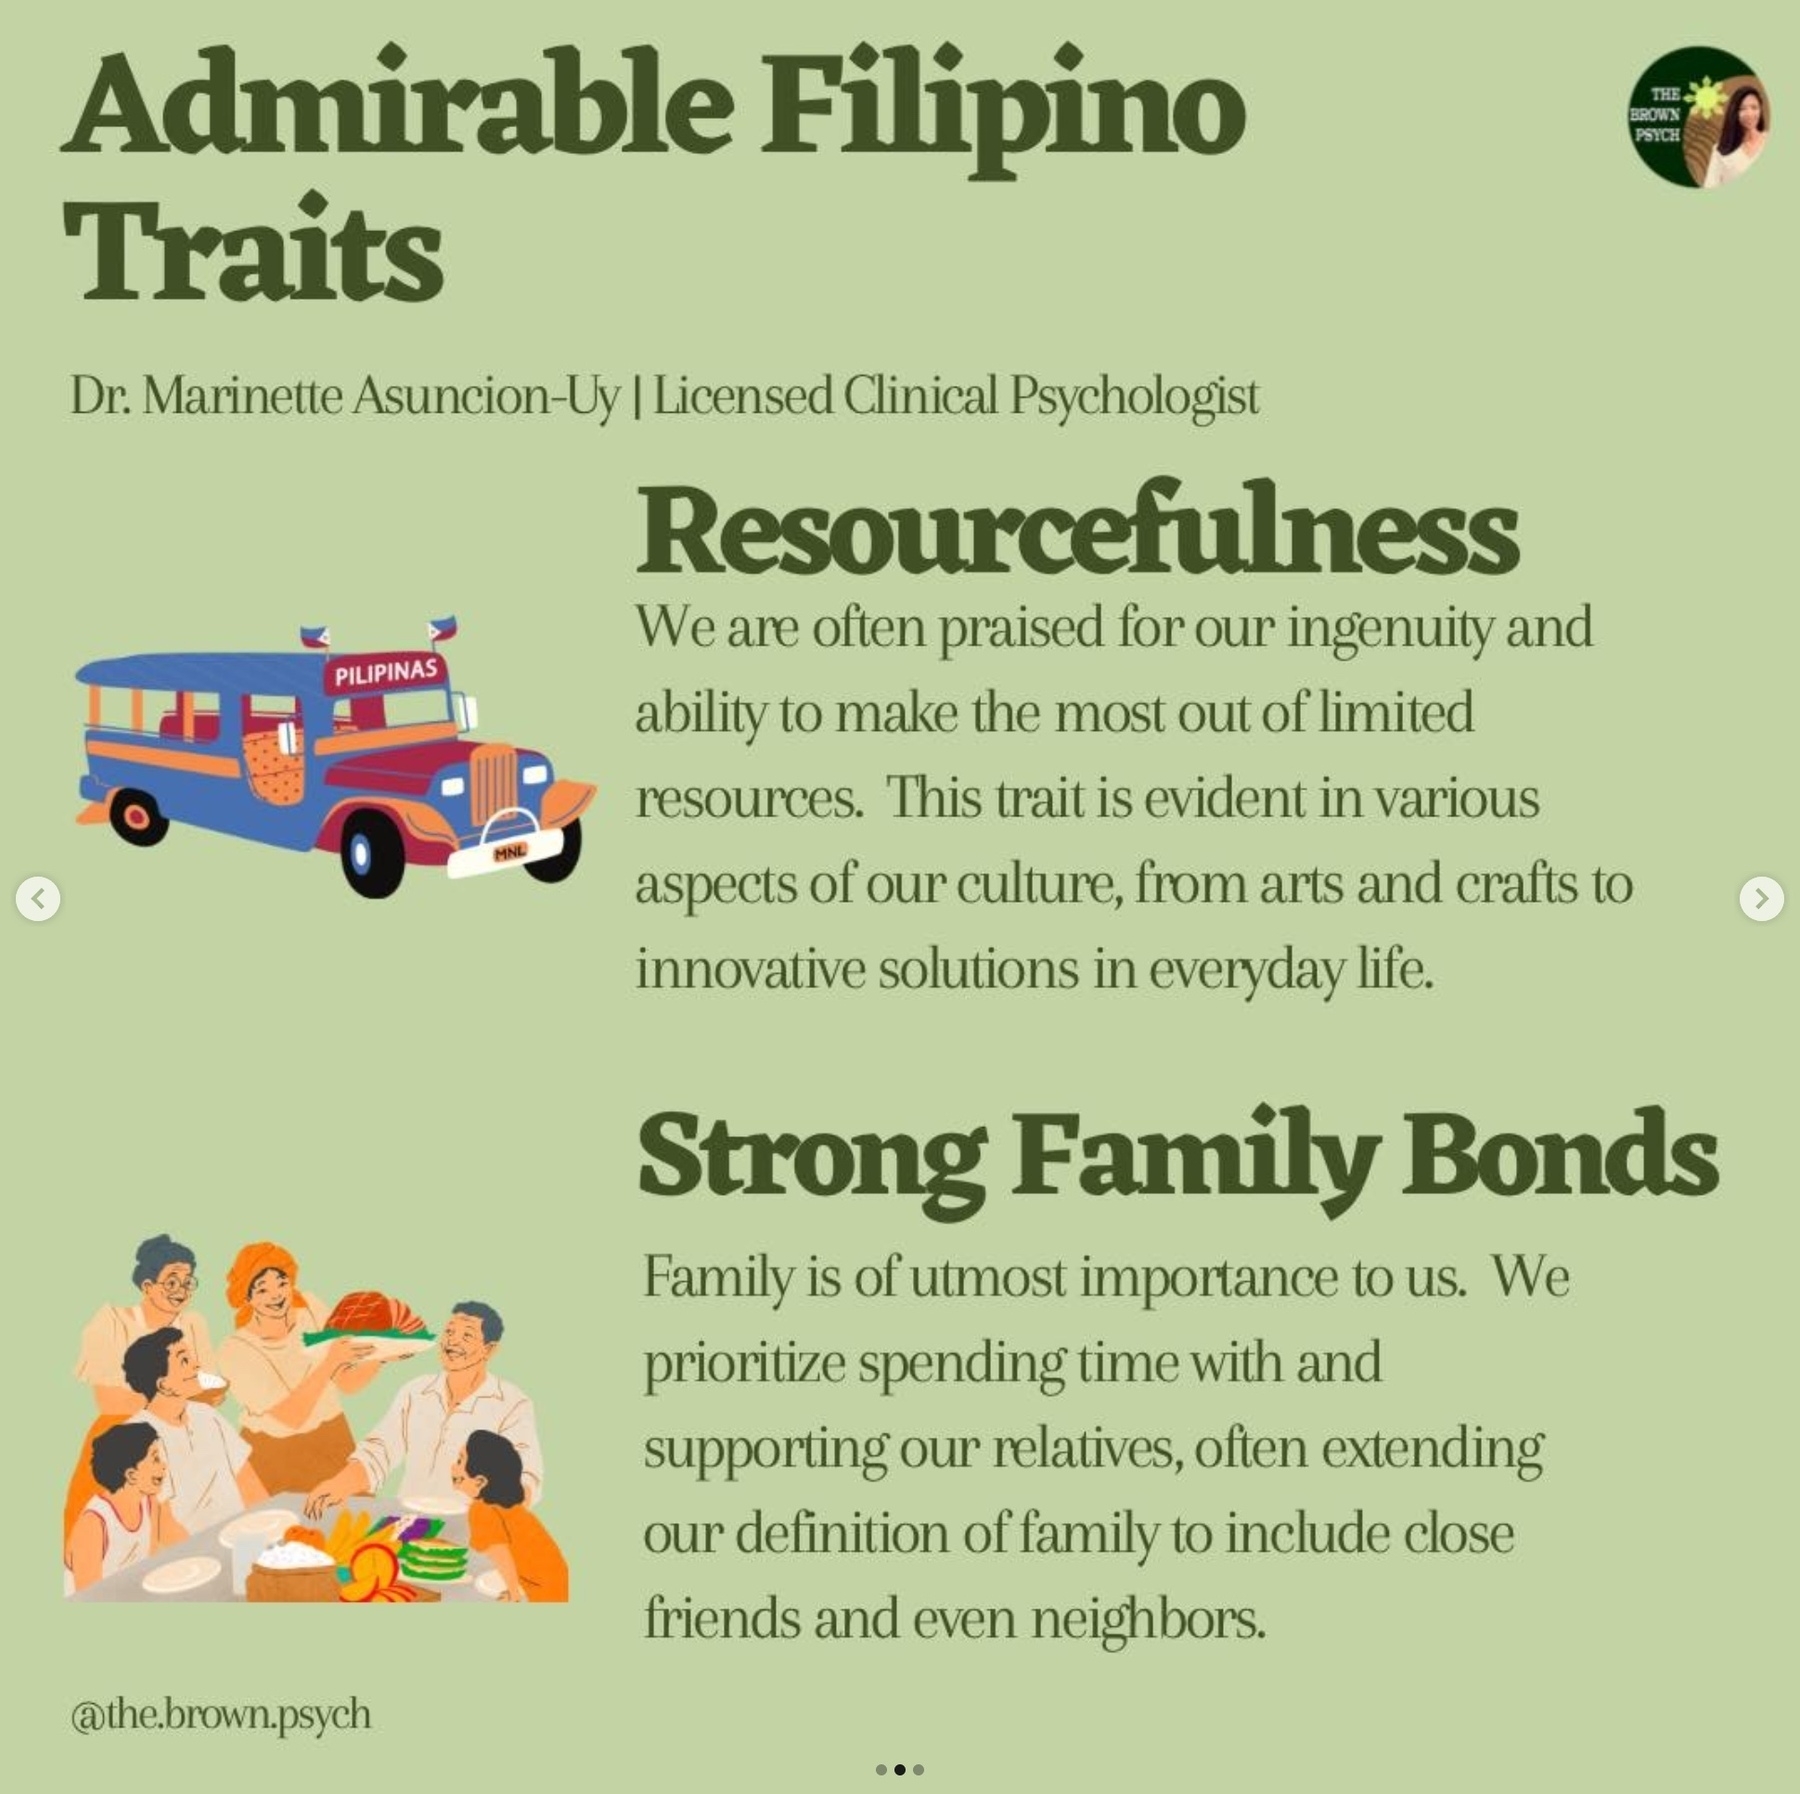 Admirable Filipino
&10;Traits
&10;THE BROWN PSYCH
&10;Dr. Marinette Asuncion-Uy | Licensed Clinical Psychologist
&10;Resourcefulness We are often praised for our ingenuity and
&10;PILIPINAS
&10;ability to make the most out of limited resources. This trait is evident in various aspects of our culture, from arts and crafts to innovative solutions in everyday life.
&10;Strong Family Bonds
&10;Family is of utmost importance to us. We prioritize spending time with and supporting our relatives, often extending our definition of family to include close friends and even neighbors.
&10;@the.brown.psych